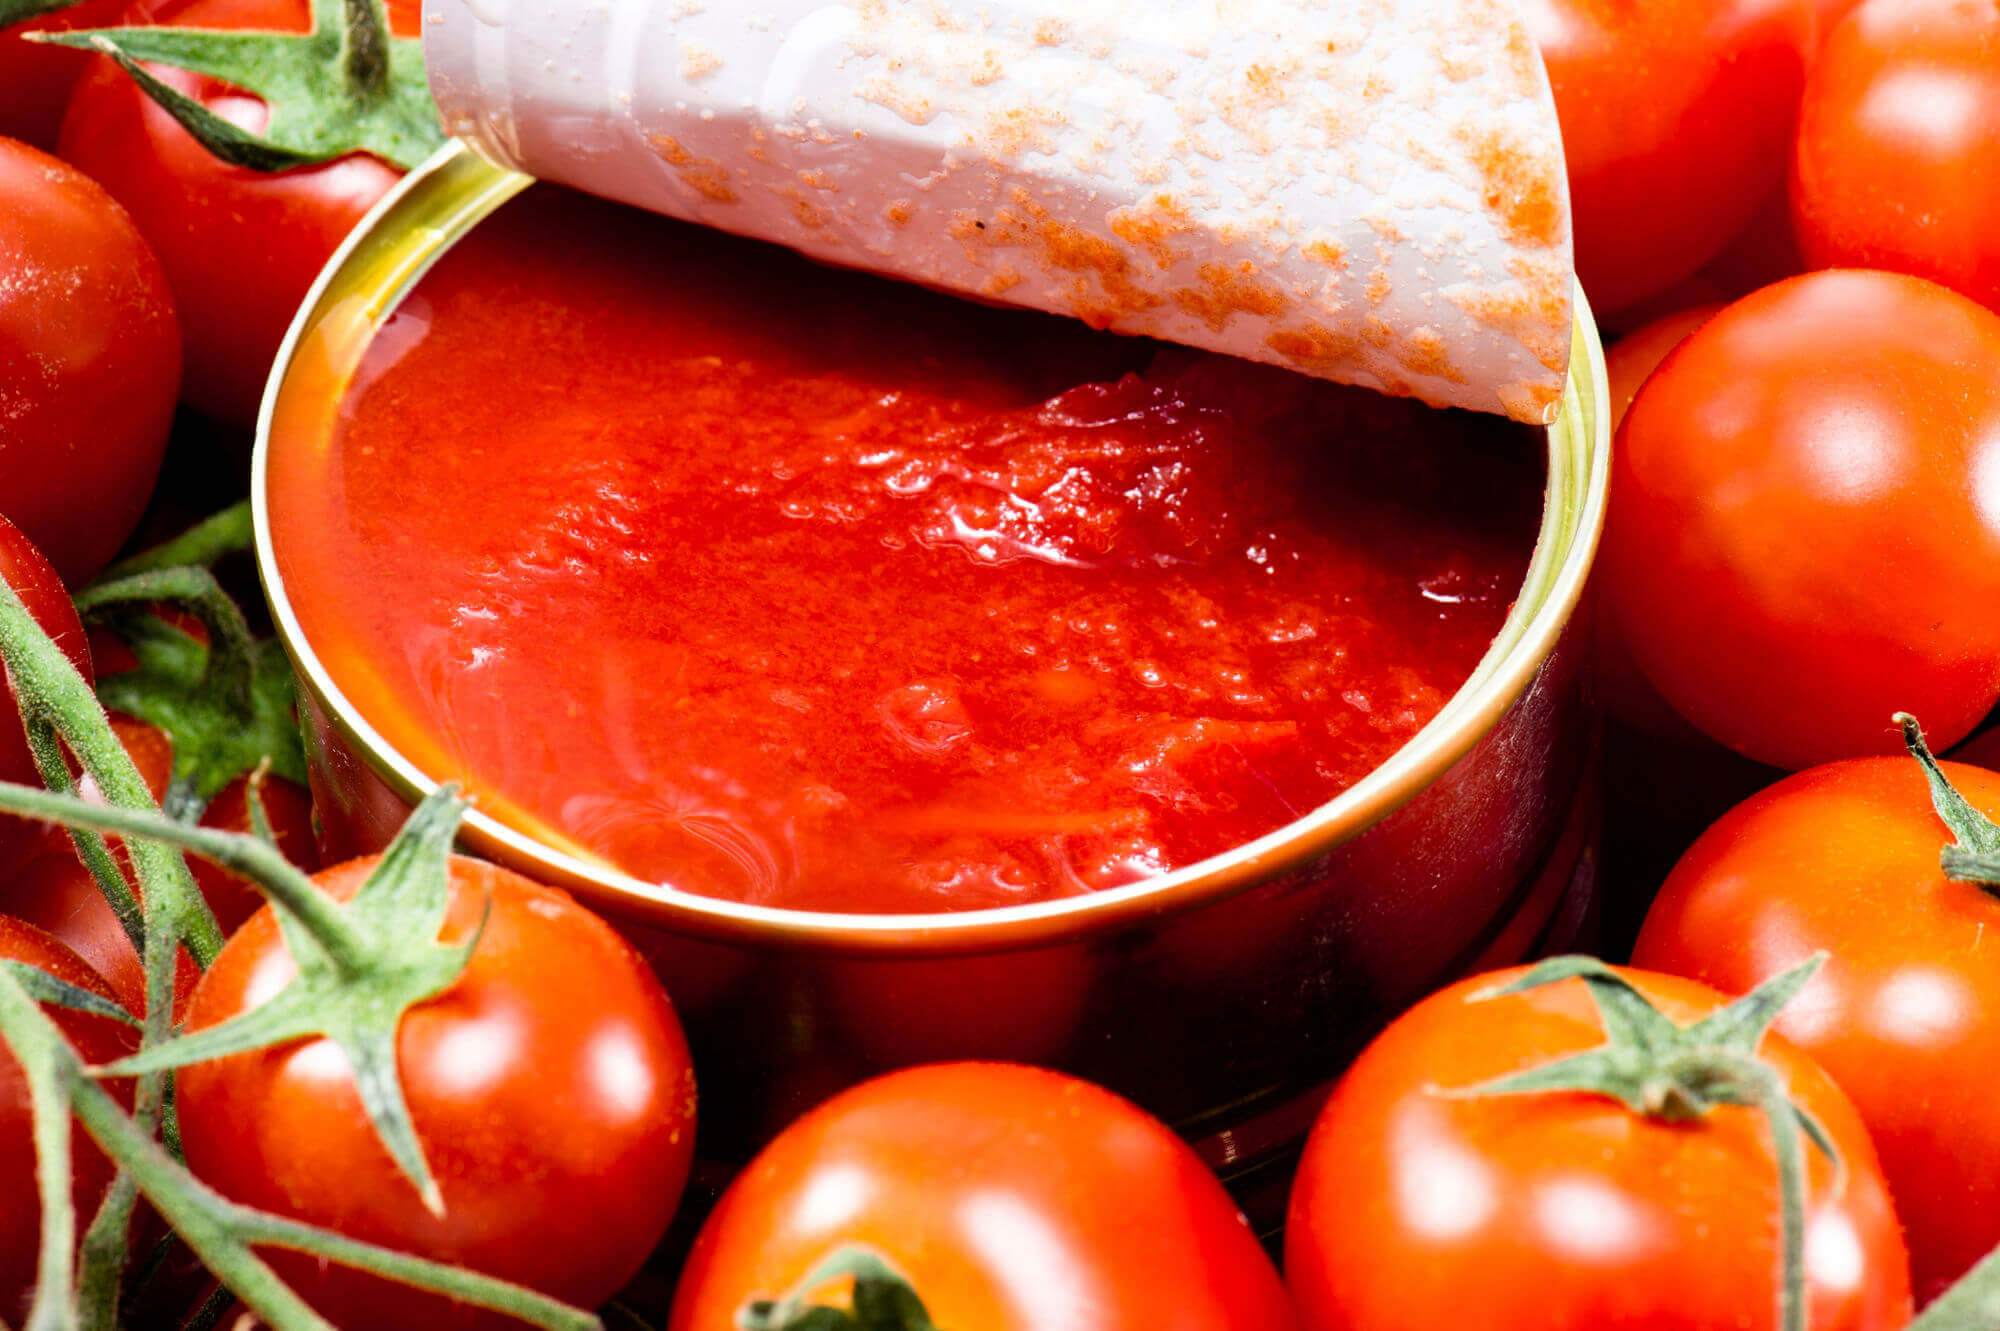 How many kilograms of canned tomatoes does an average Italian consume?